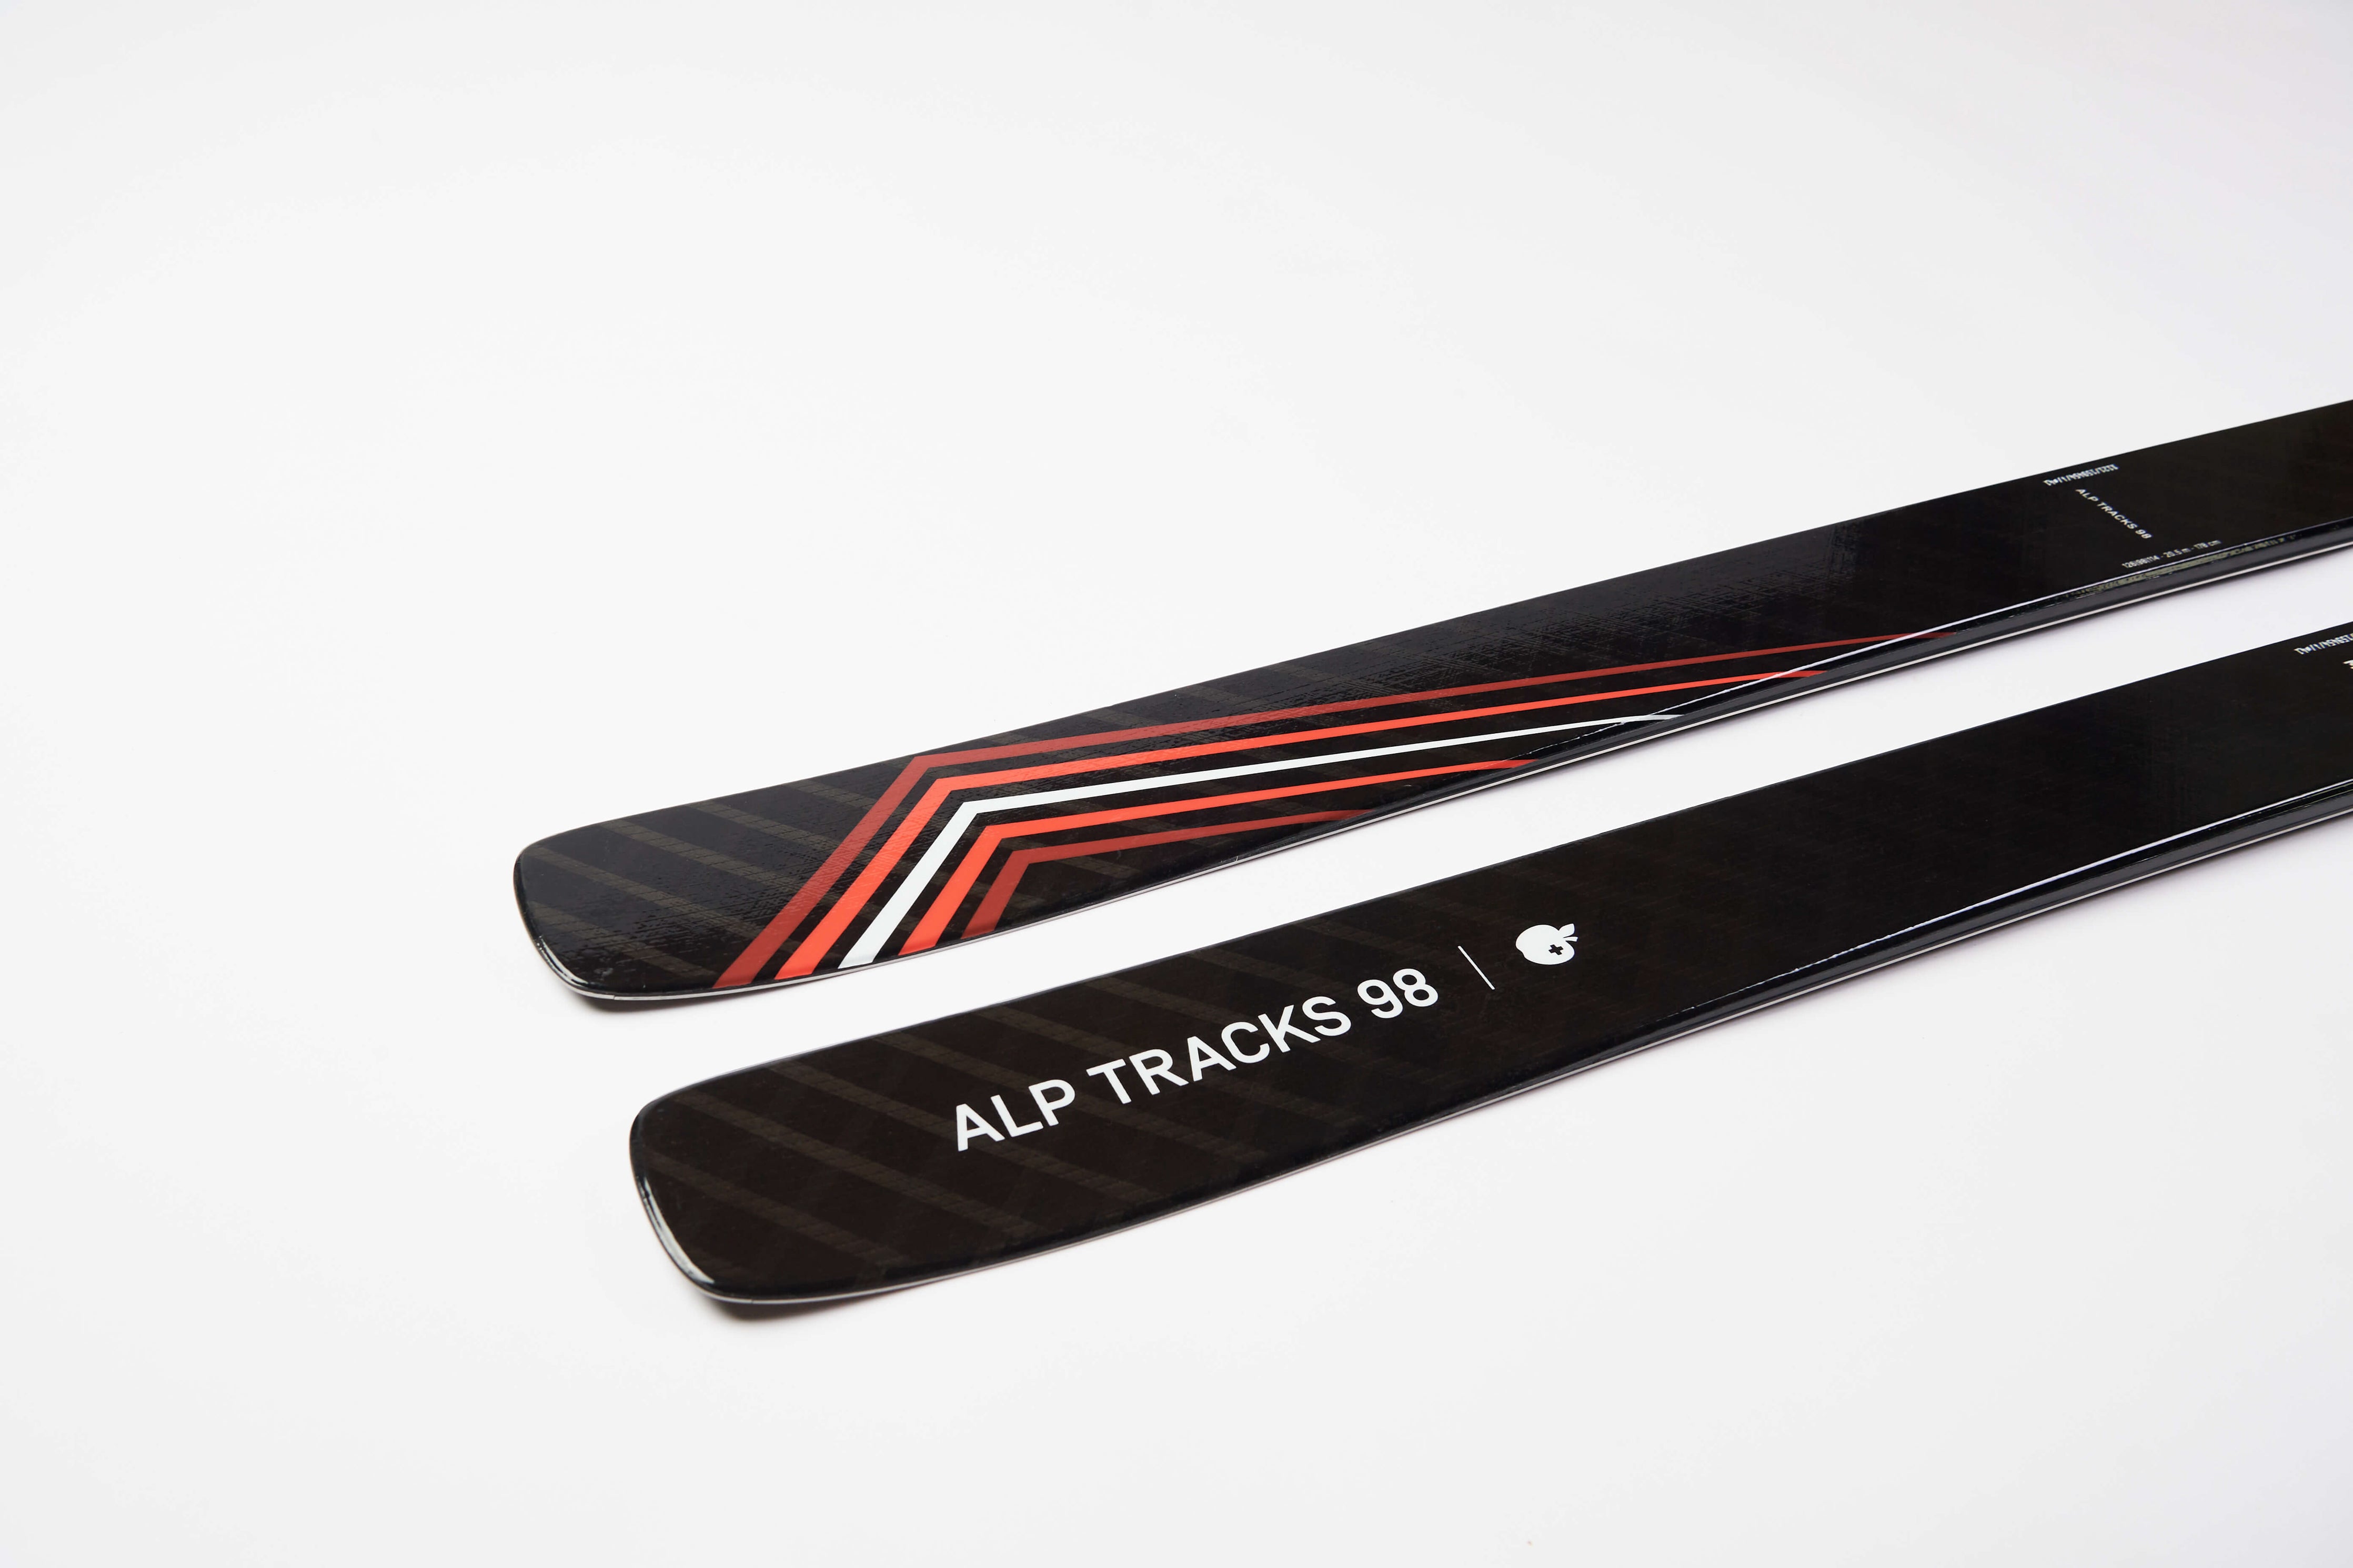 Forge my own path with Movement&#39;s Alp Tracks 98 touring skis.